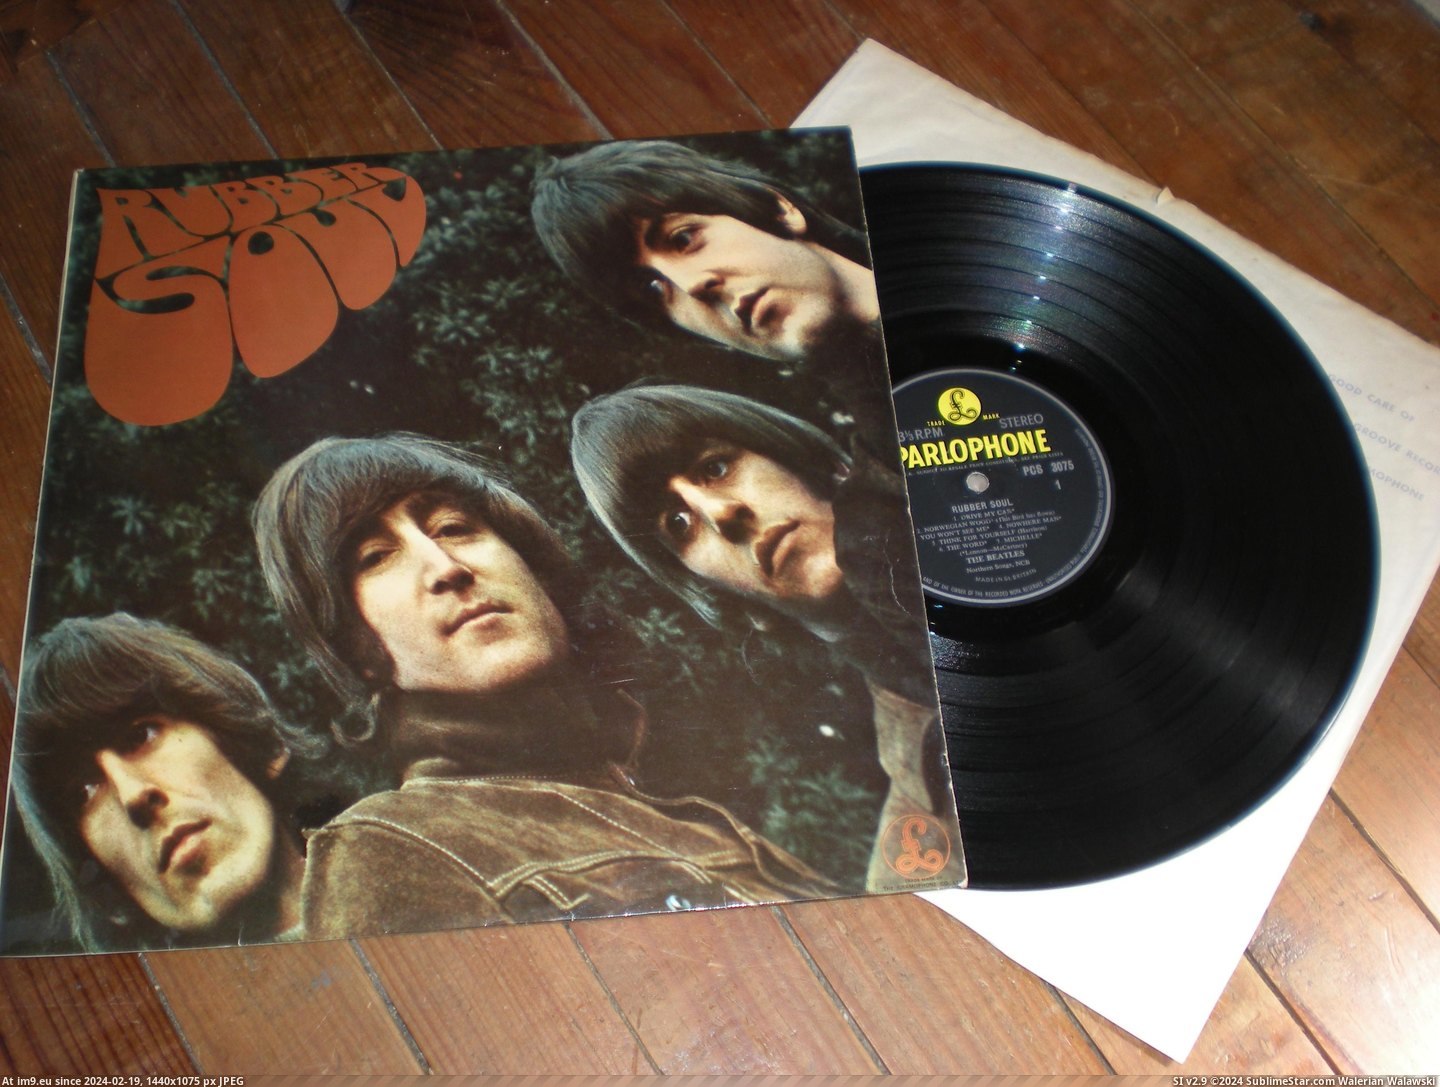 #Rubber #Stereo #Soul Rubber Soul STEREO 5 Pic. (Изображение из альбом new 1))